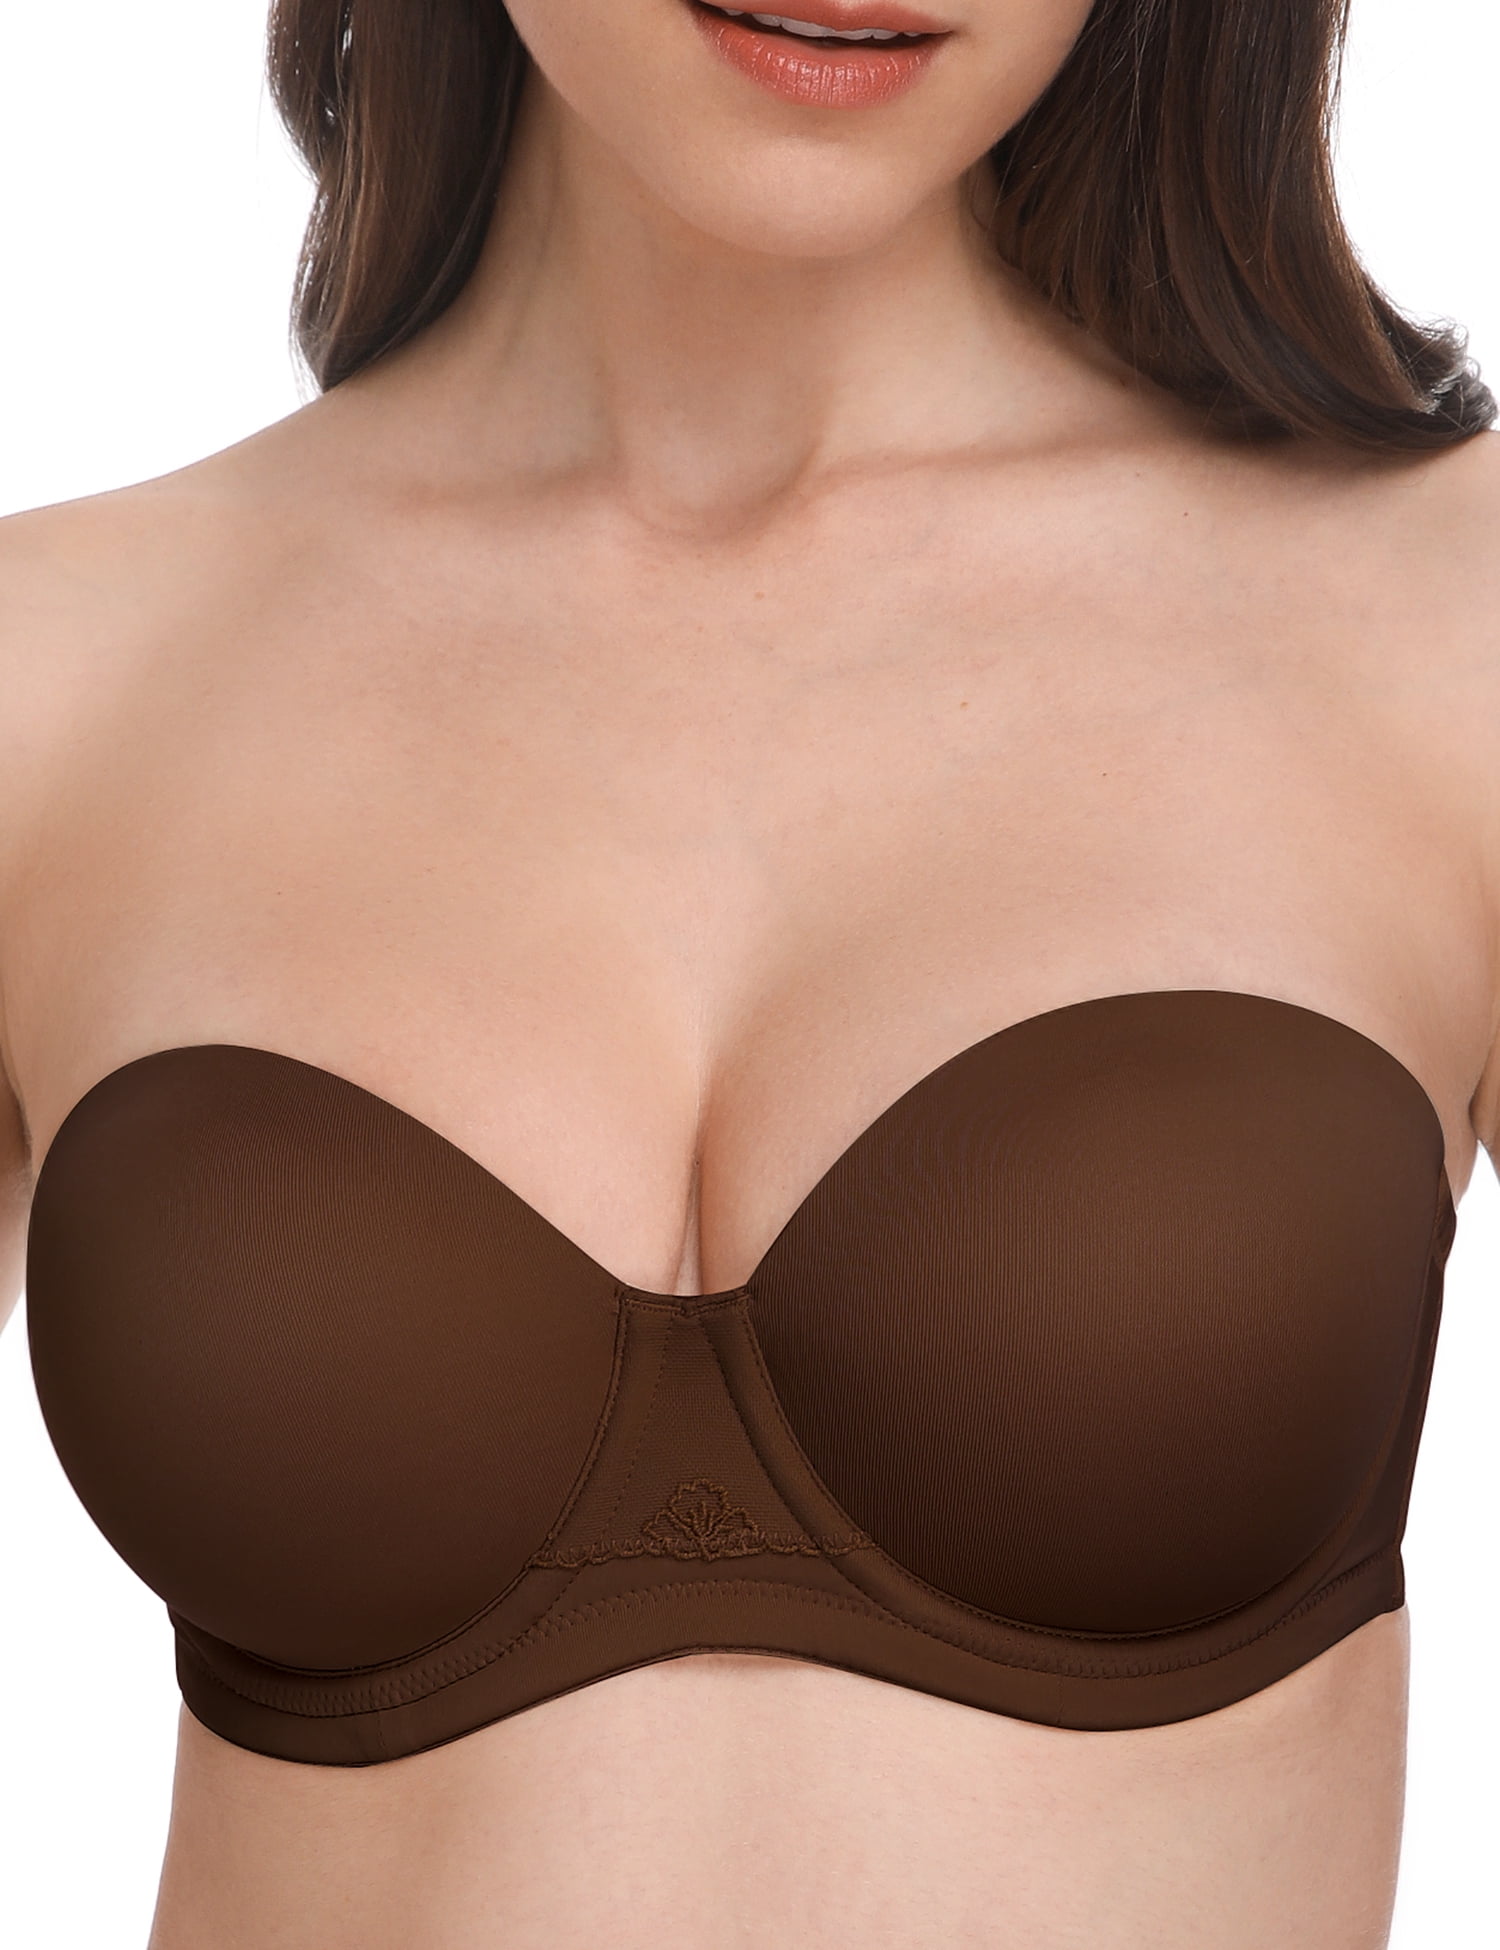 Exclare Women's Seamless Bandeau Unlined Underwire Minimizer Strapless Bra  for Large Bust(chocolate,34DD)